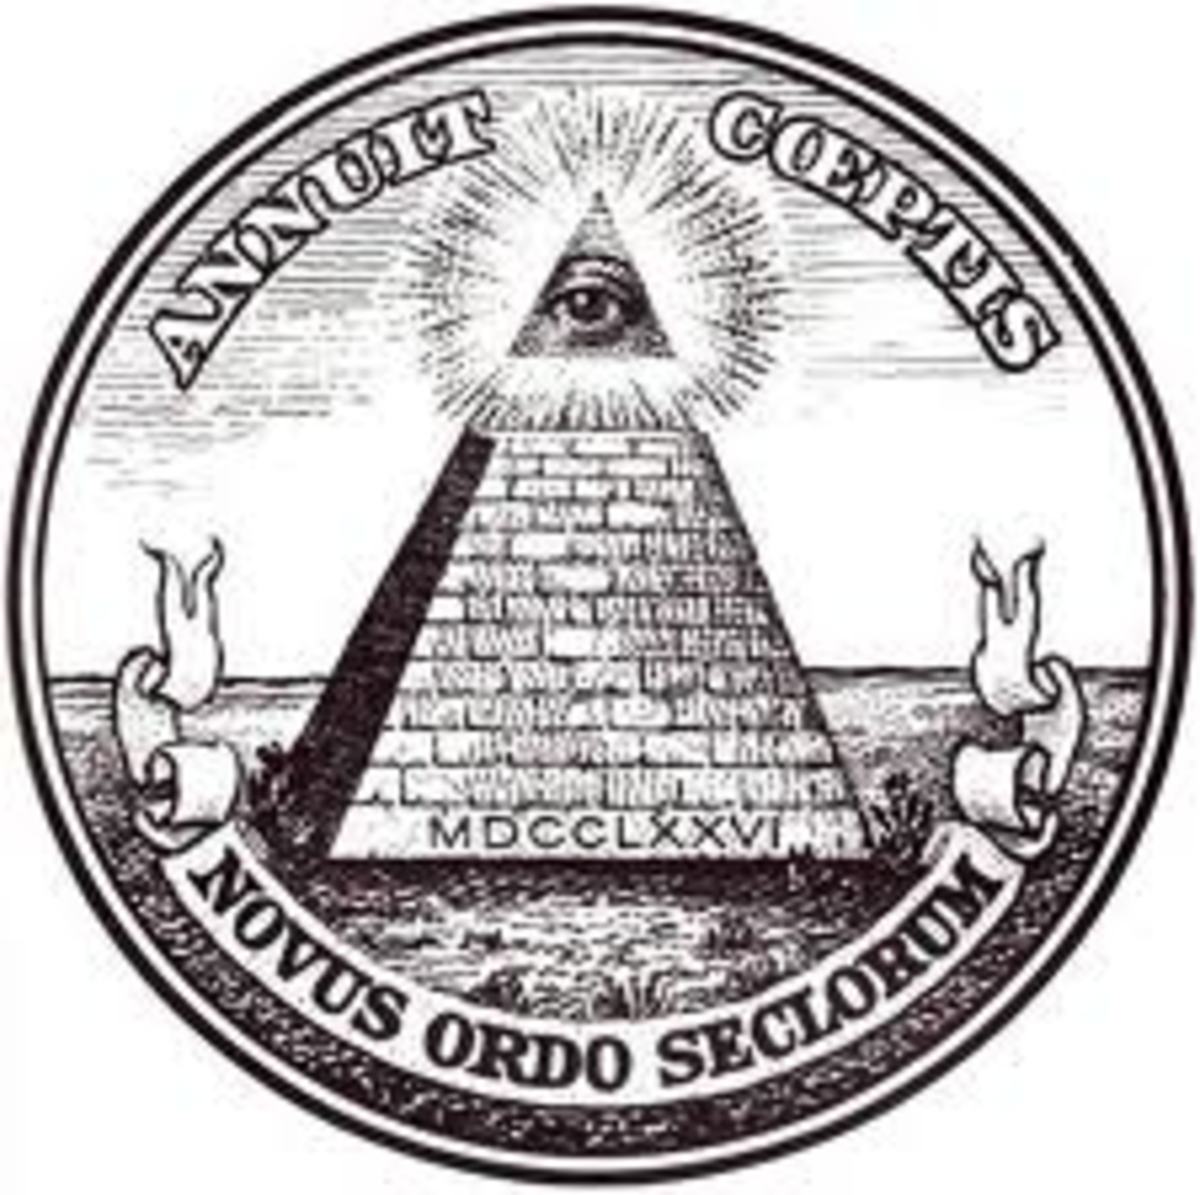 fdr-the-great-seal-and-the-occult